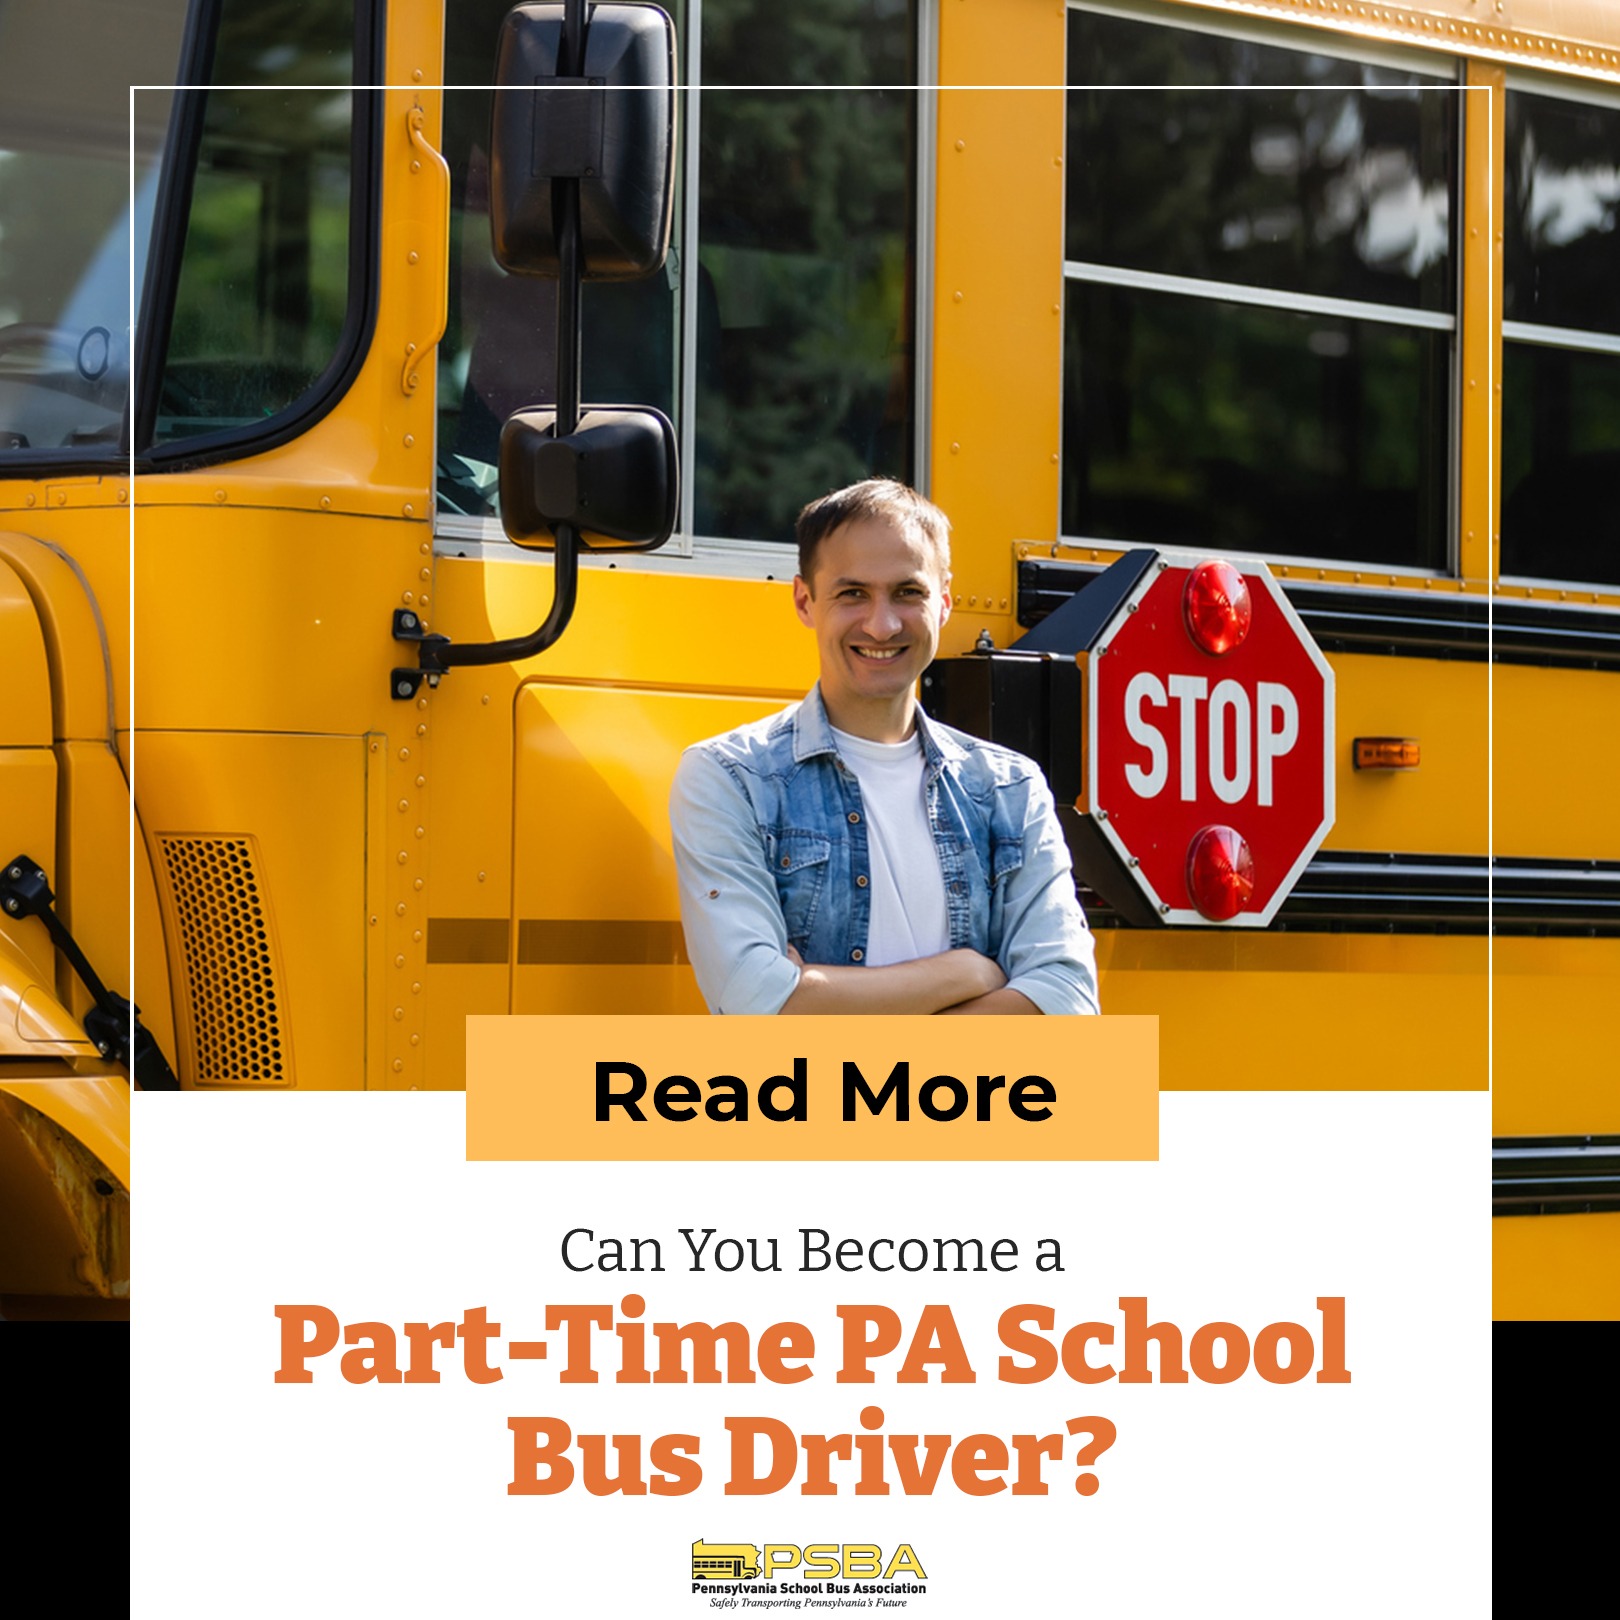 Can You Become a Part-Time PA School Bus Driver?